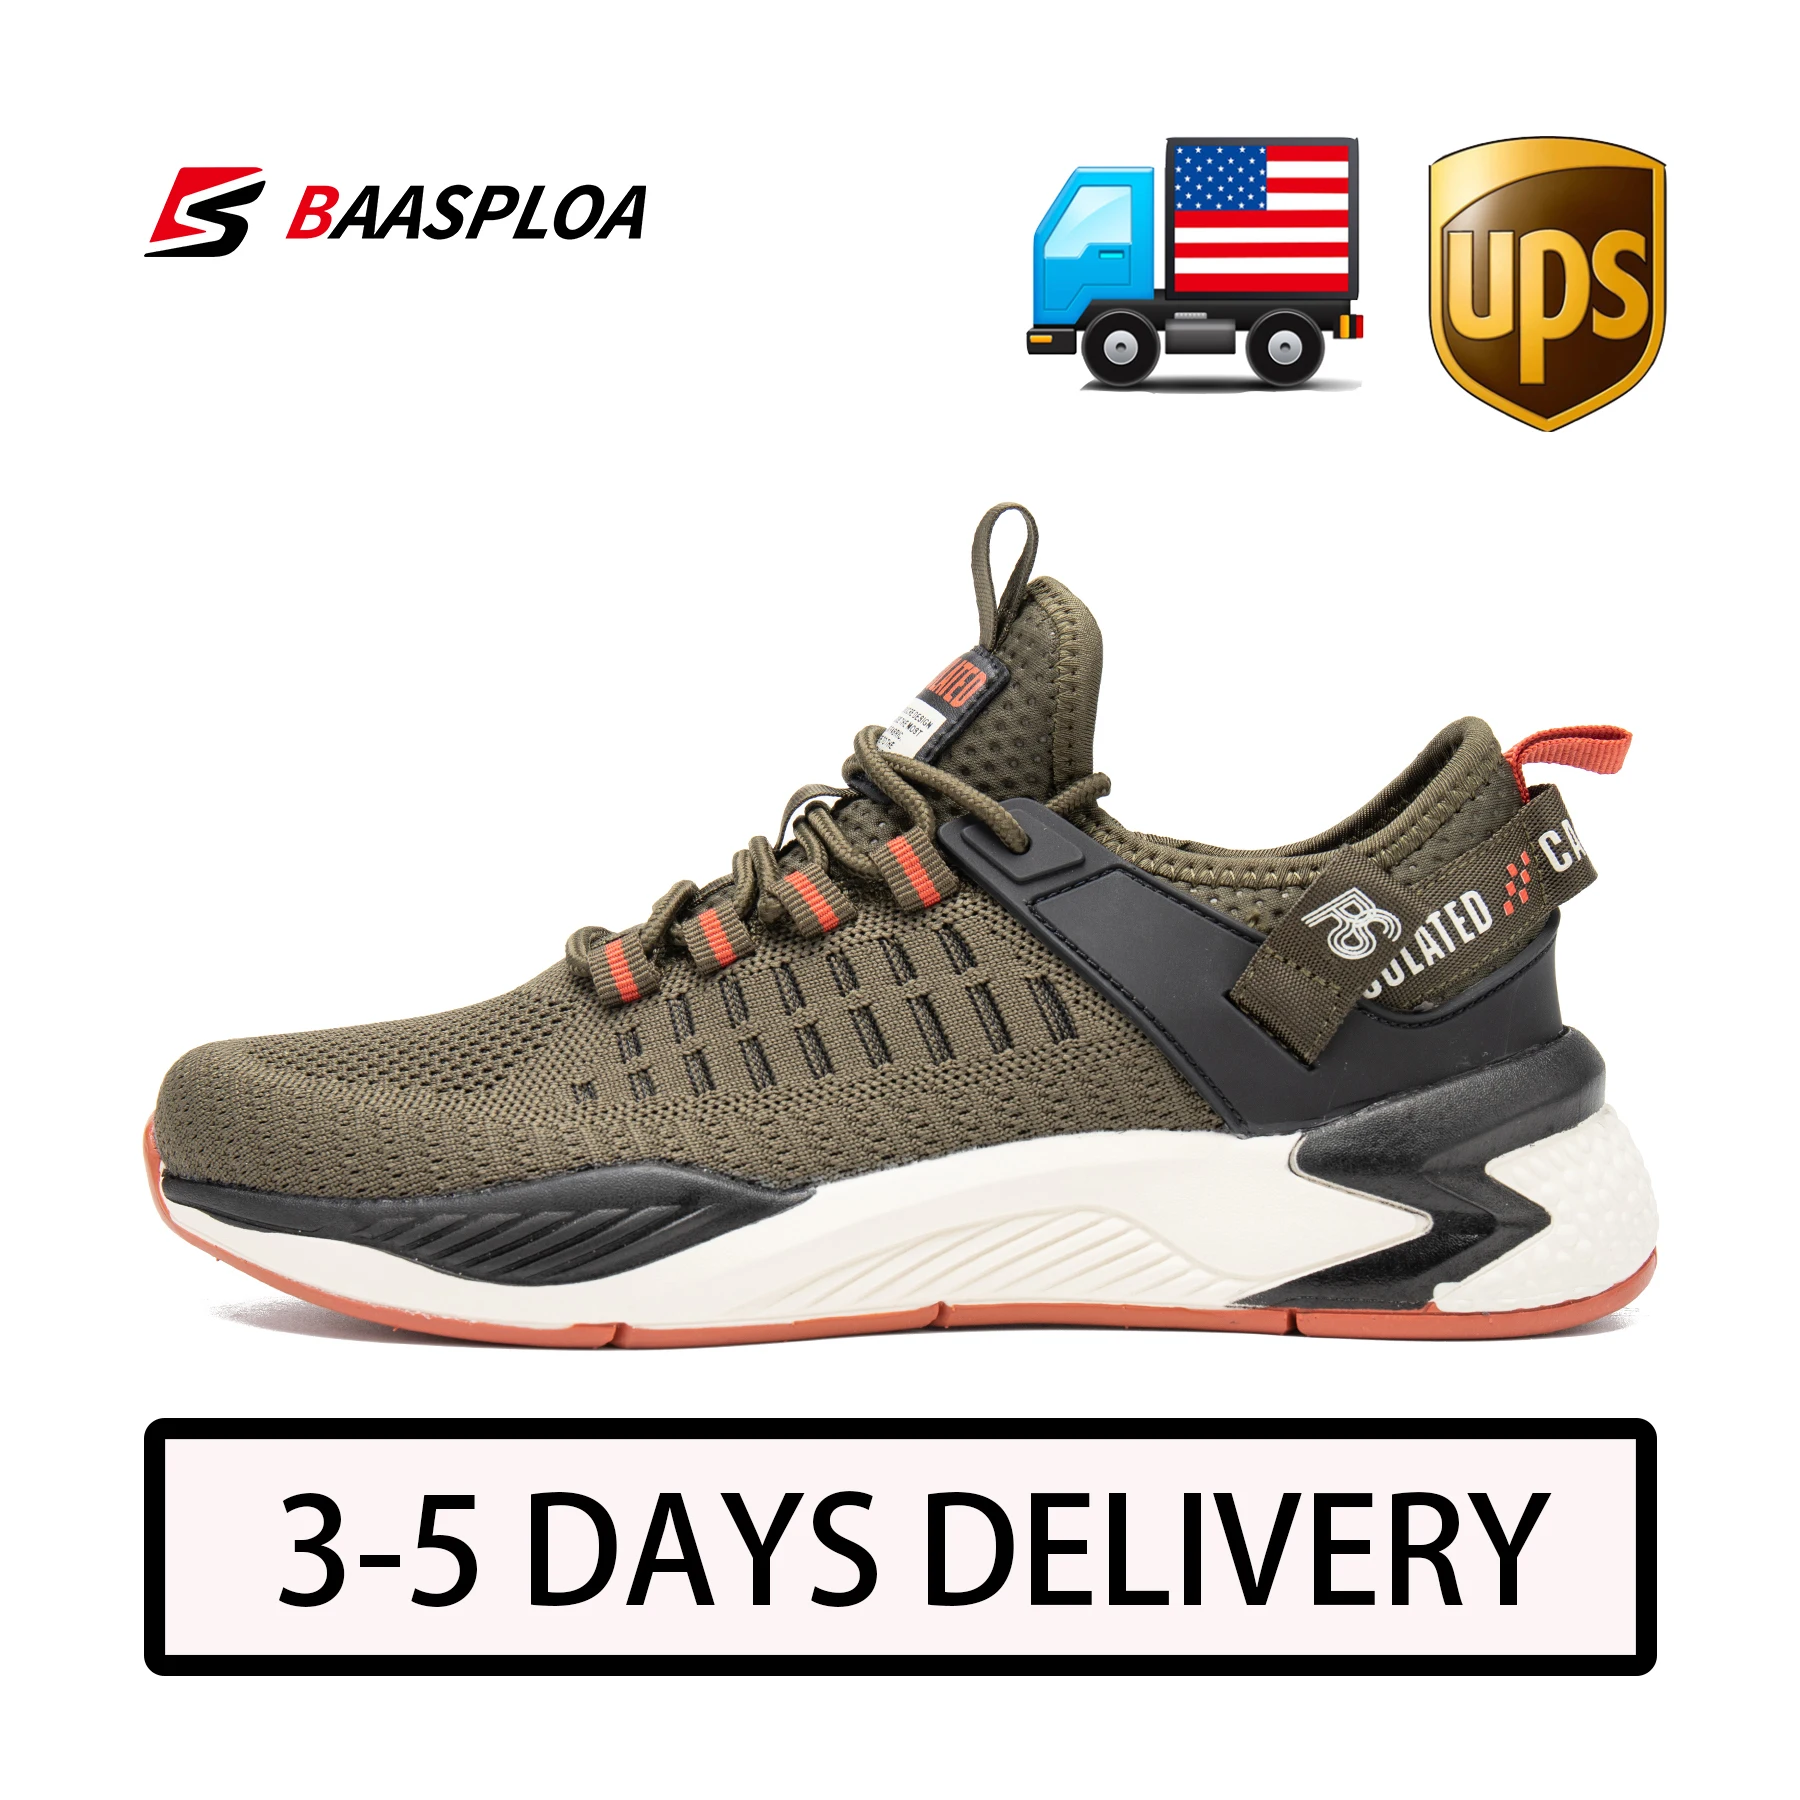 Baasploa New Men's Running Shoes Lightweight Breathable Men Sneakers Mesh Wear-resistant Casual Male Non-slip Walking Gym Shoes